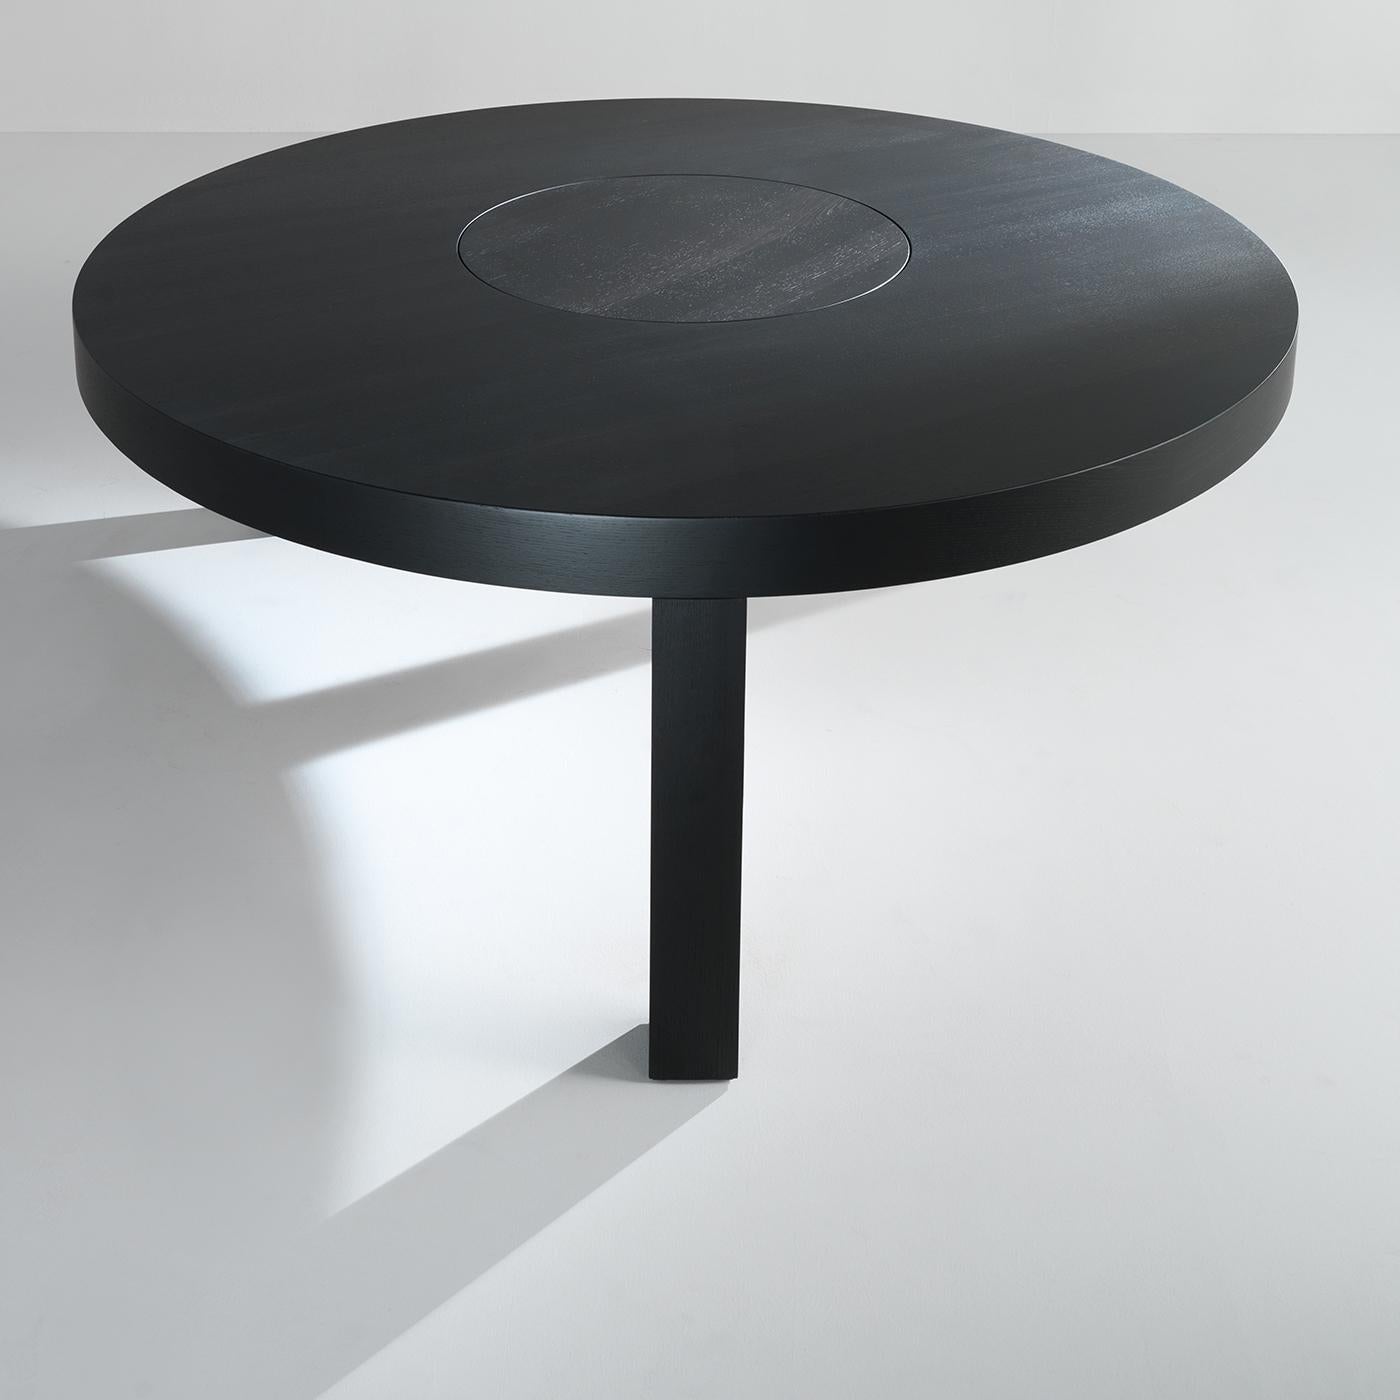 This round wood table has an elegant black finish. The table top is supported entirely by three wood legs, and the top features a lazy Susan in the middle for a combination of practicality and elegance. This beautiful piece will be a perfect